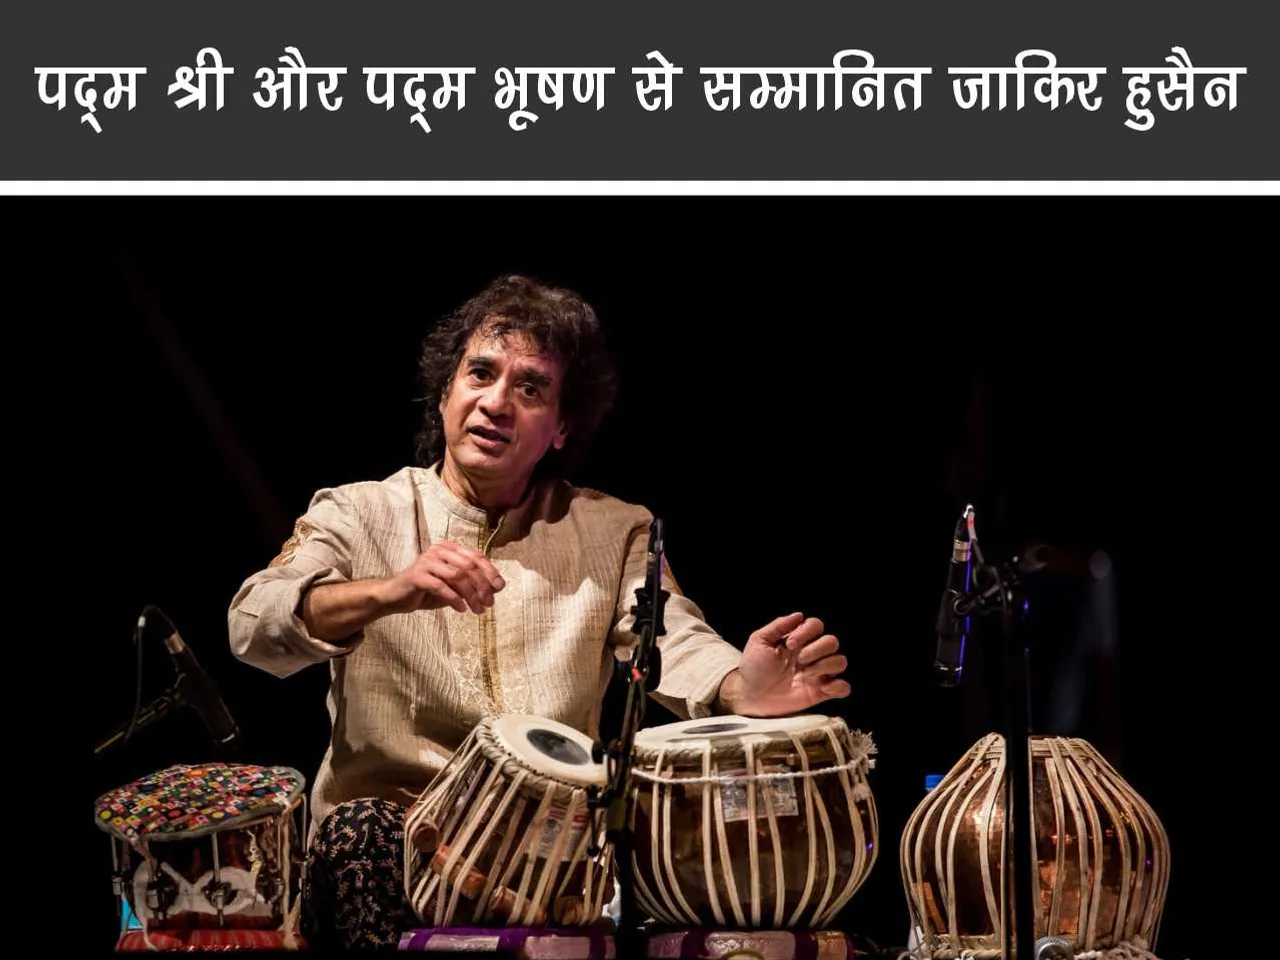 Zakir Hussain Performing on stage